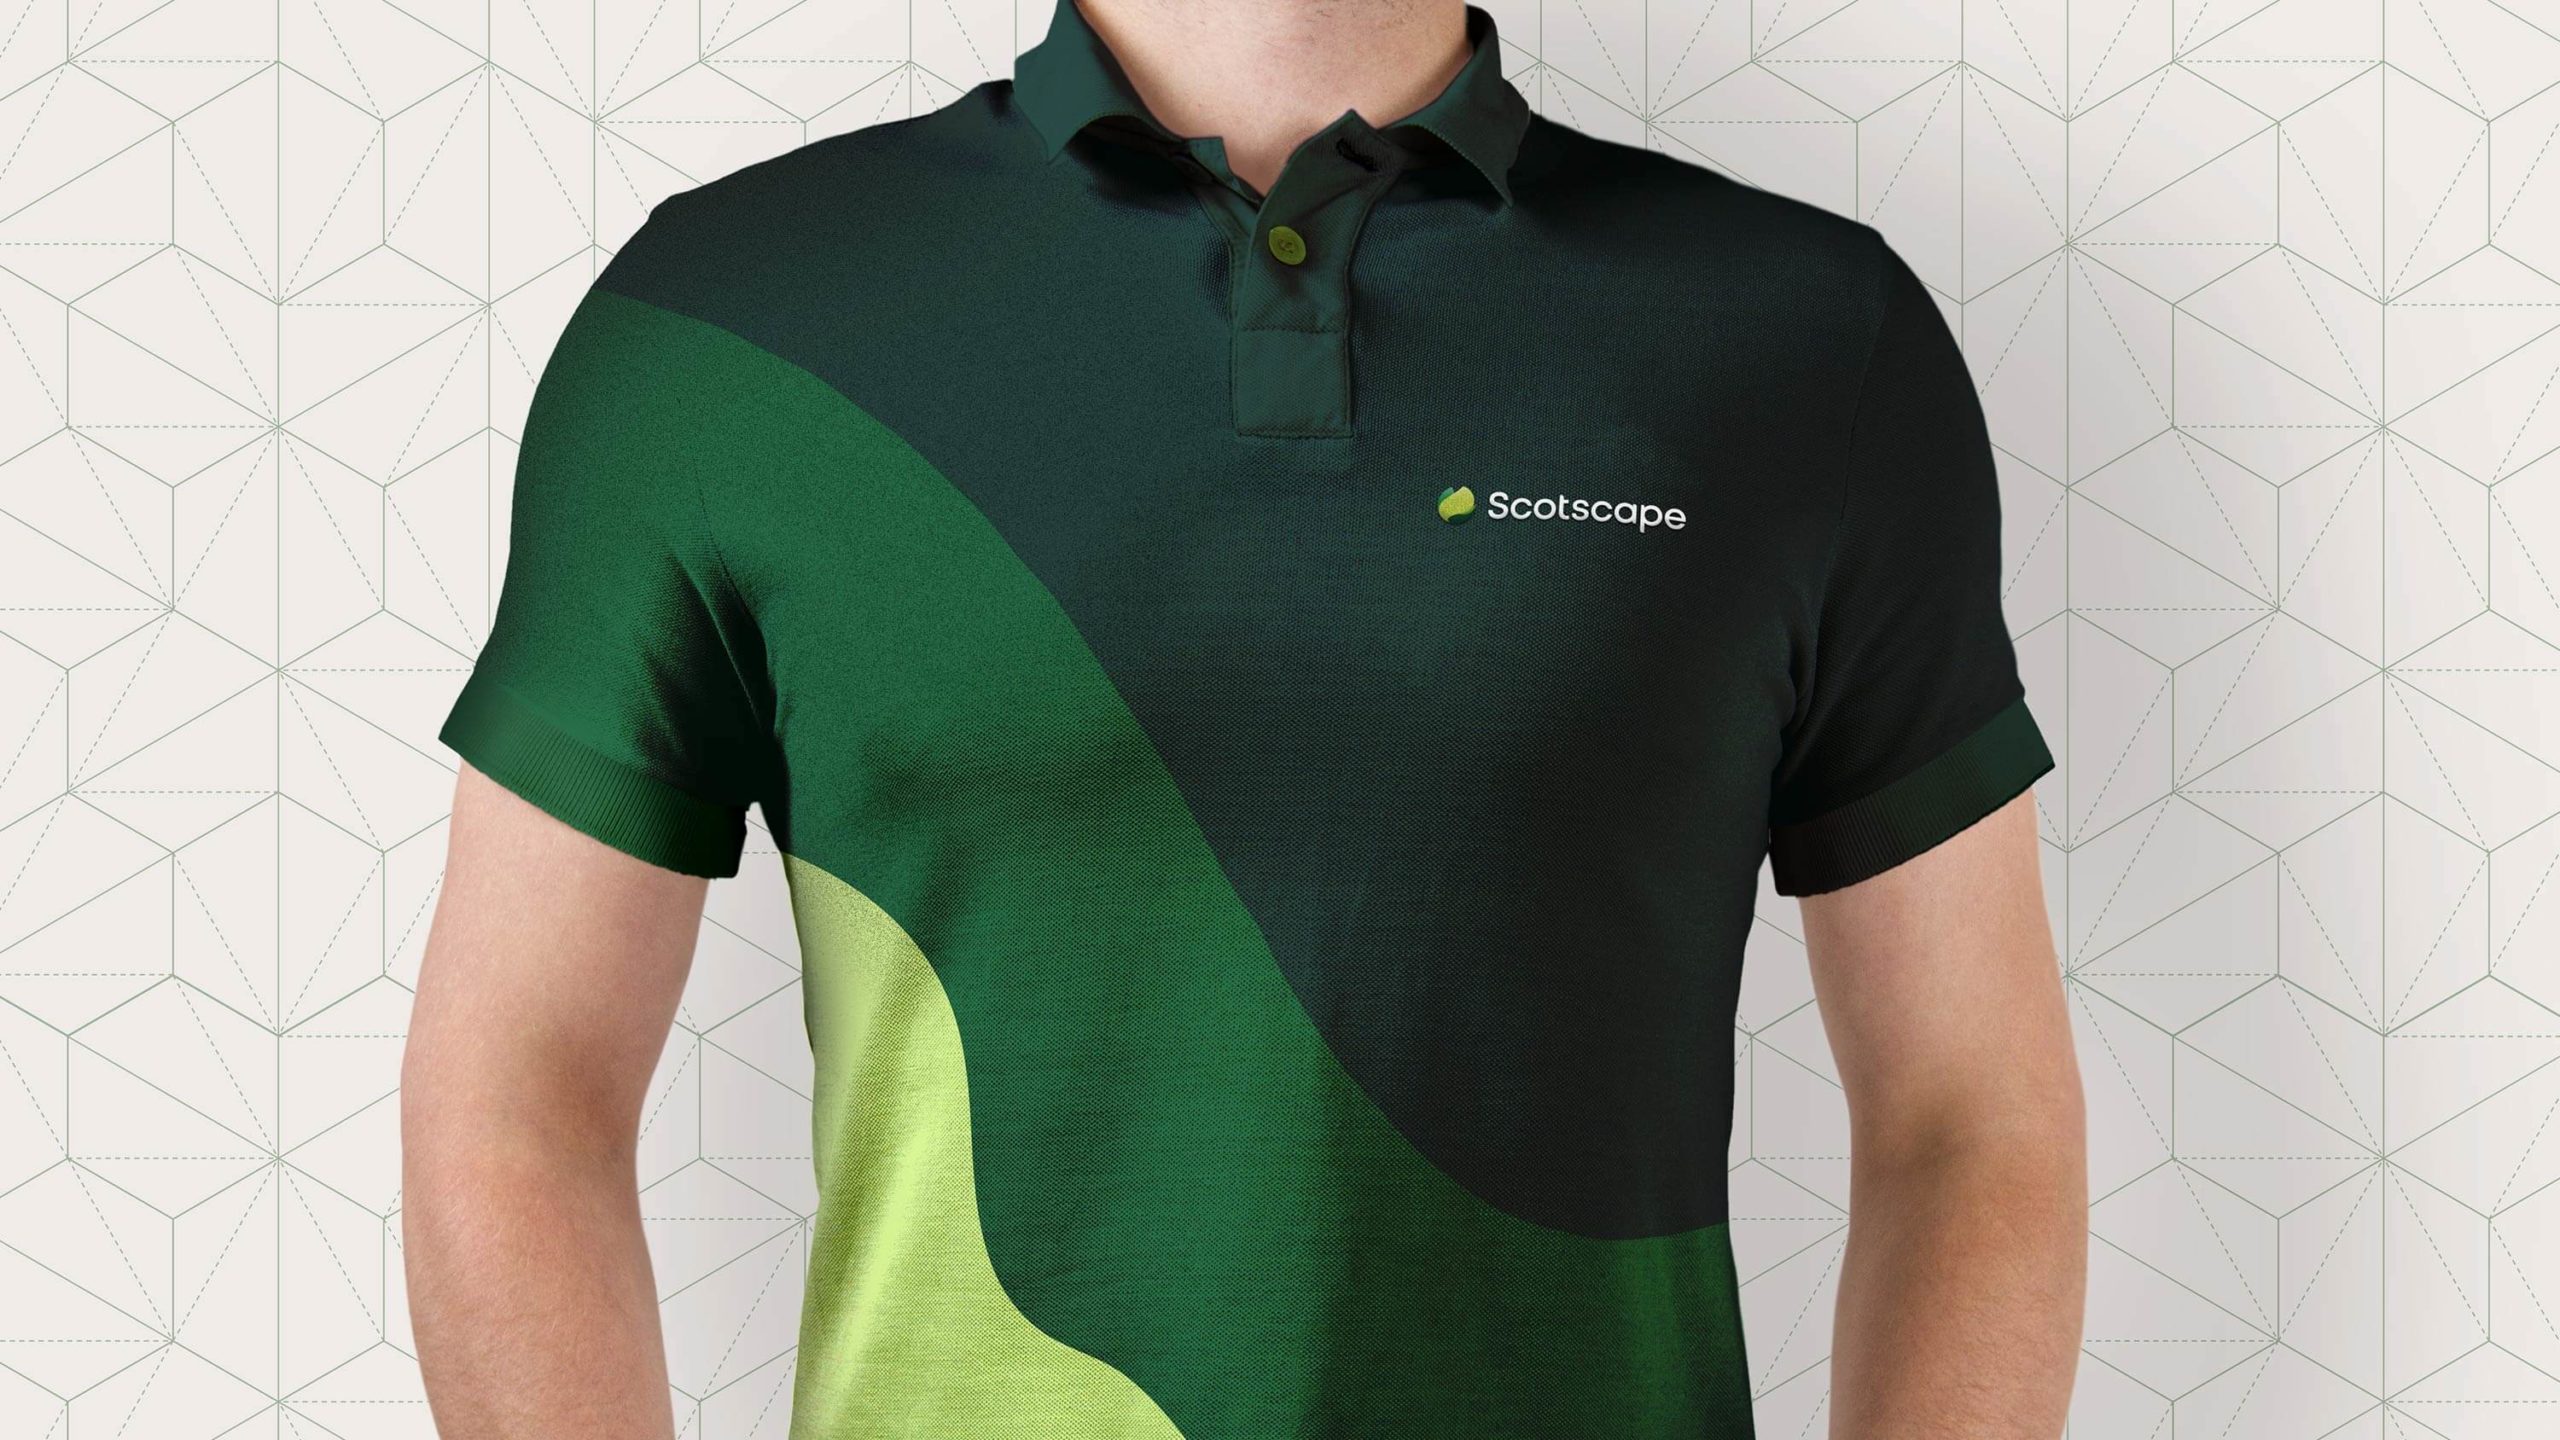 Scotscape branded workpersons polo t-shirt